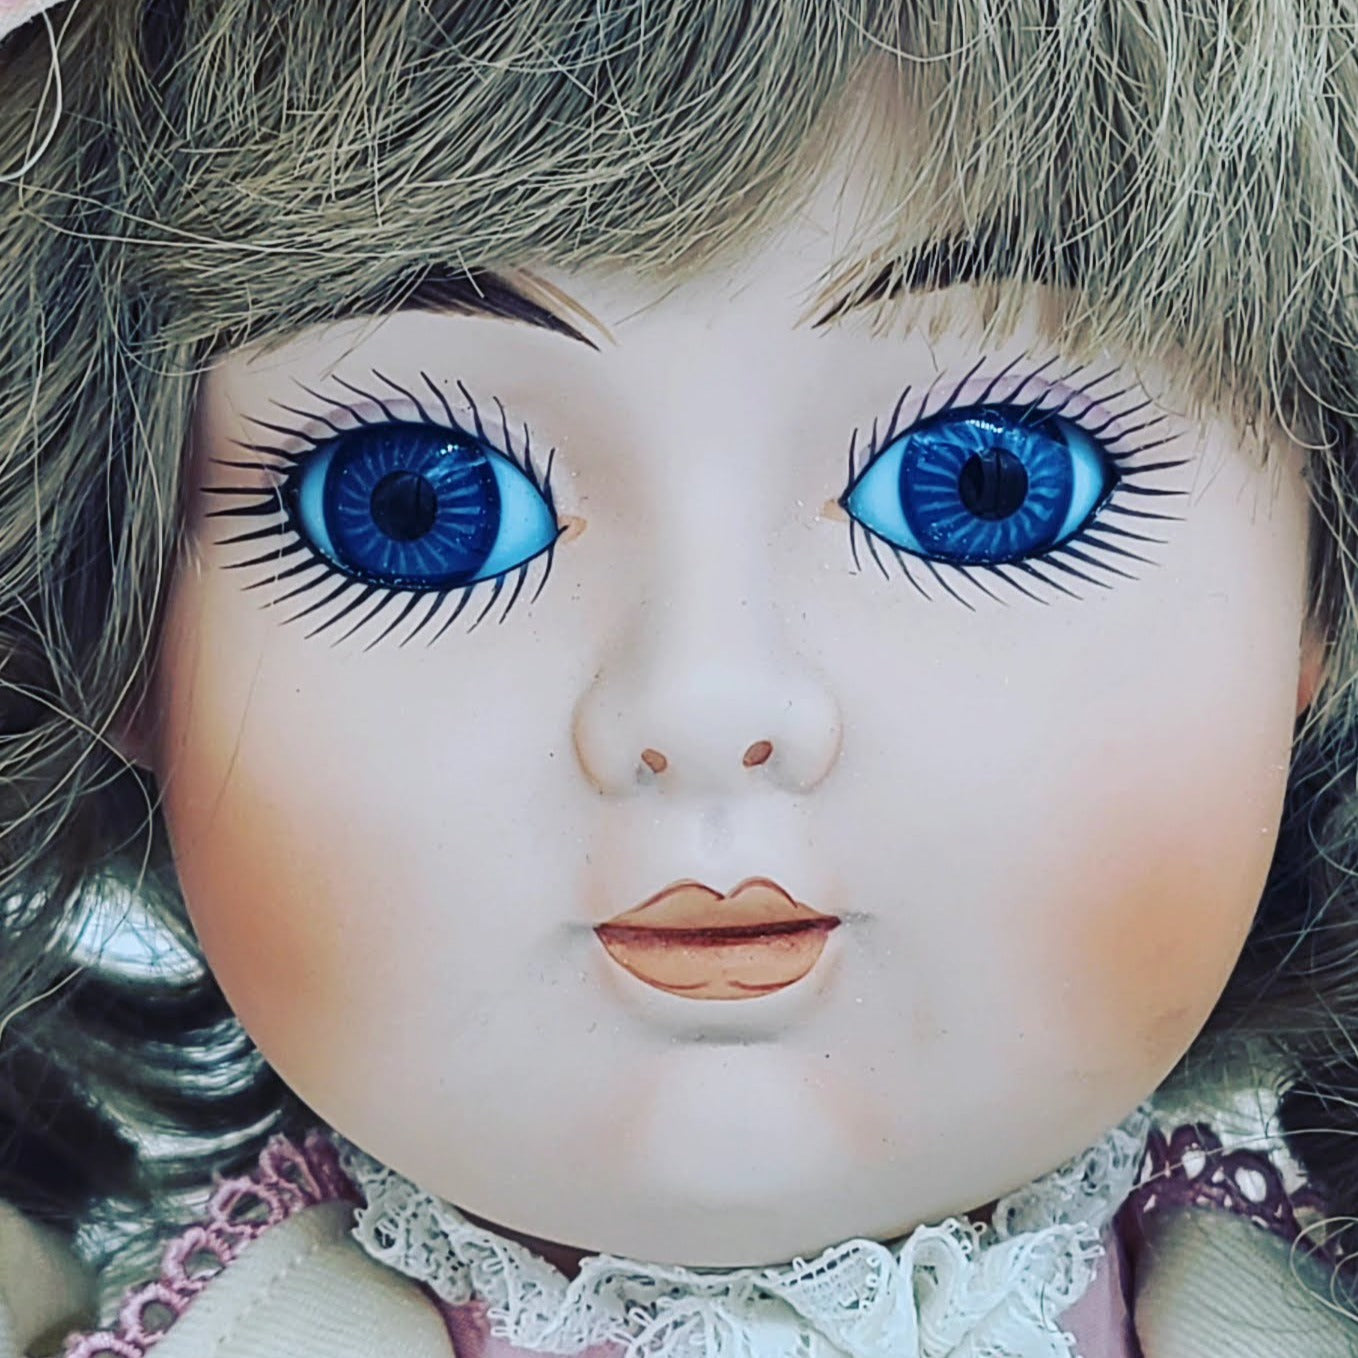 SALE! Haydée Haunted Doll ~ 19" Gorham MUSICAL Jumeau Bébé French Reproduction ~ Paranormal ~ Commands Respect ~ Highly Intelligent ~ Does Better With Seasoned Investigators Rather than Newbies